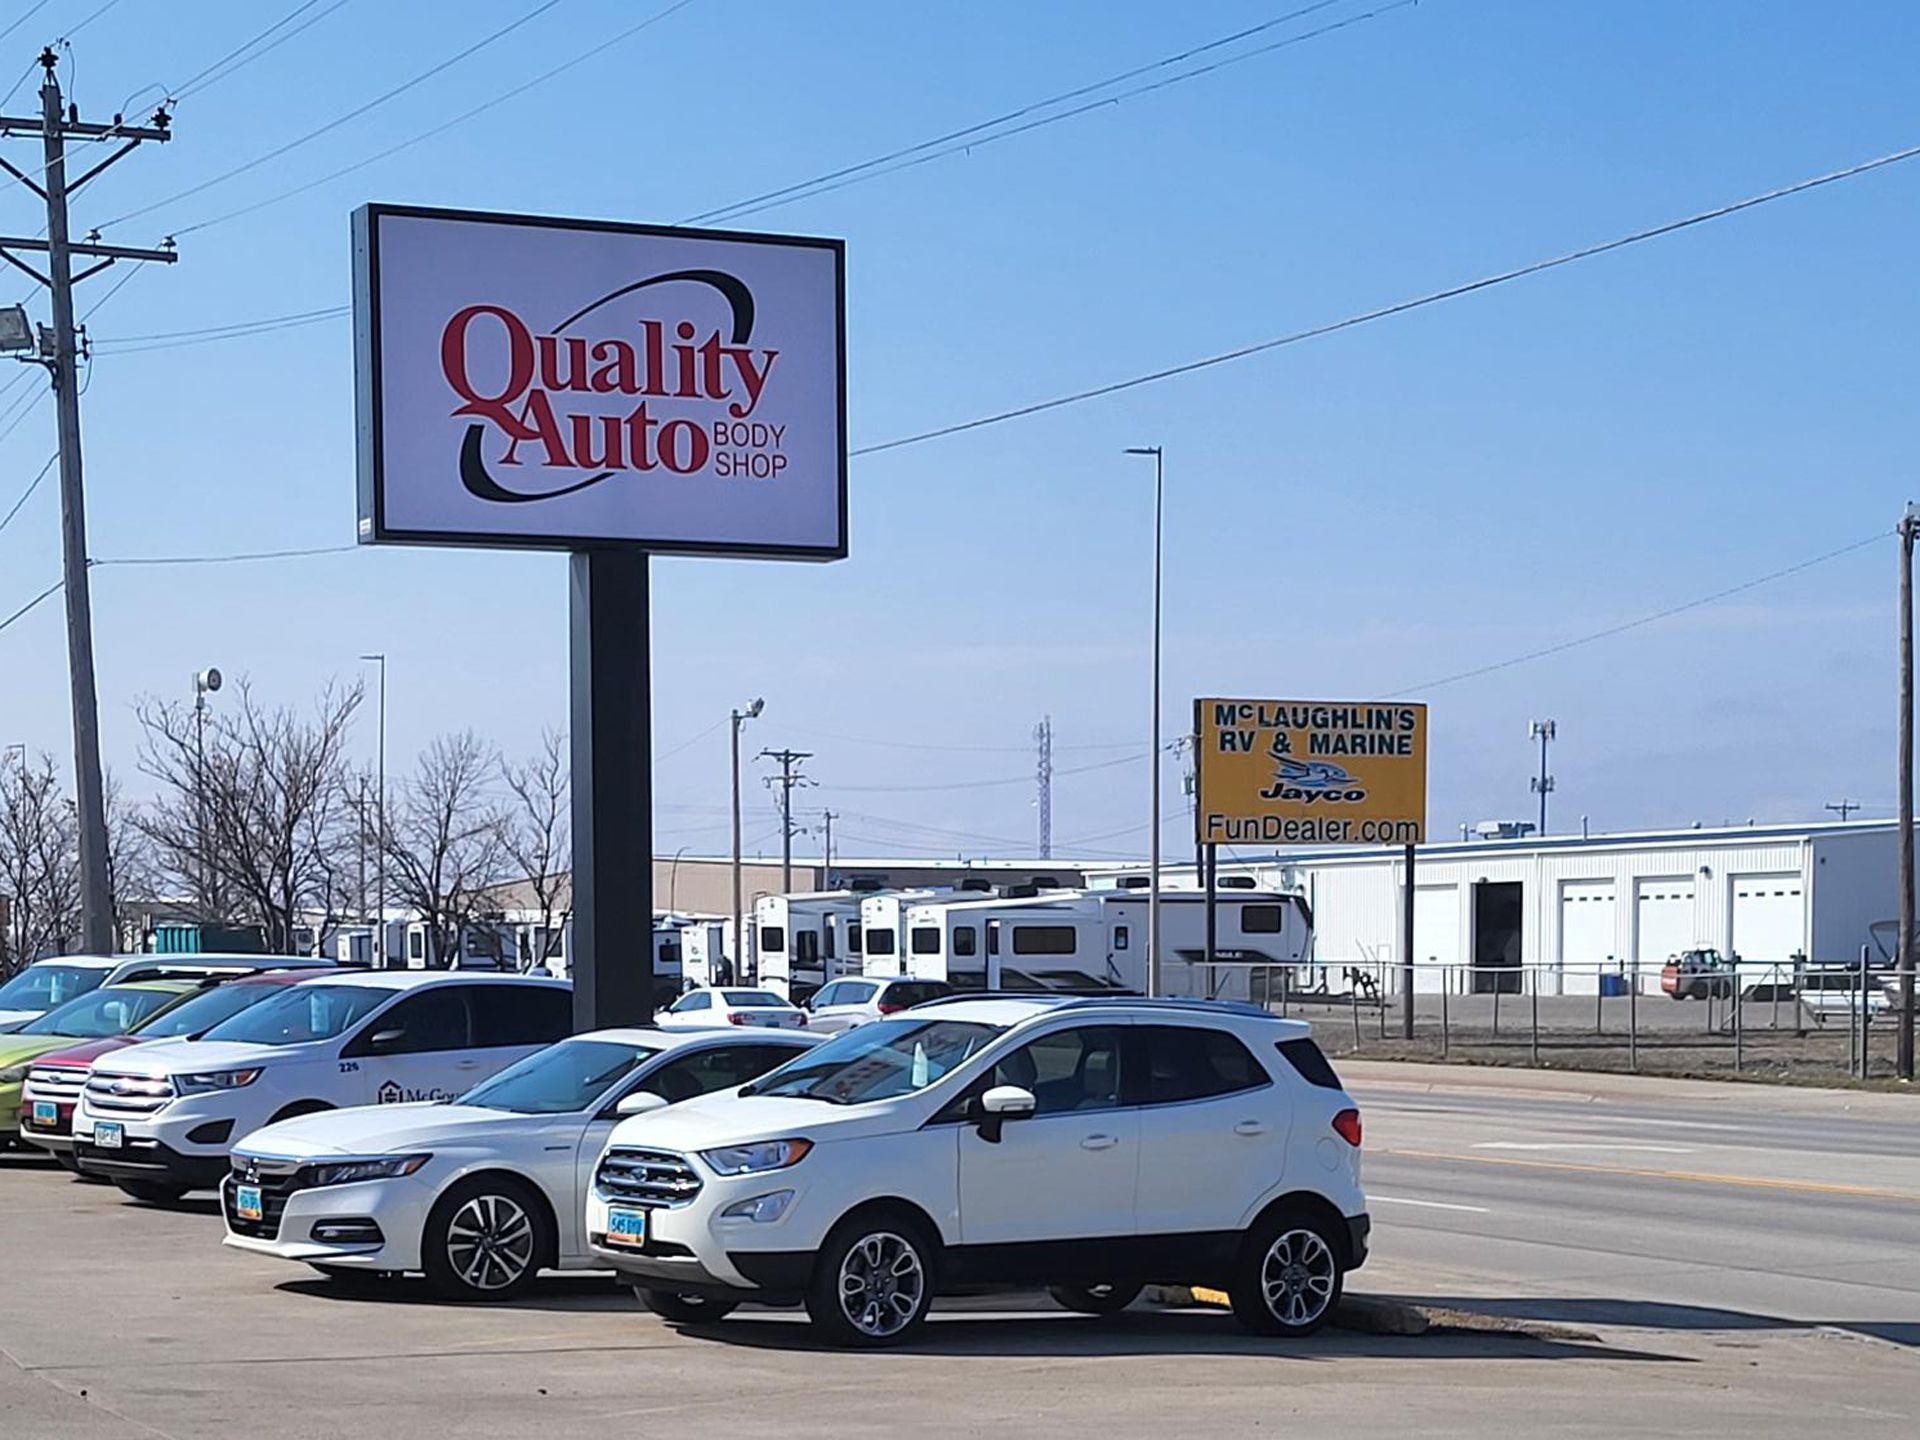 A row of cars are parked in front of a quality auto body shop sign